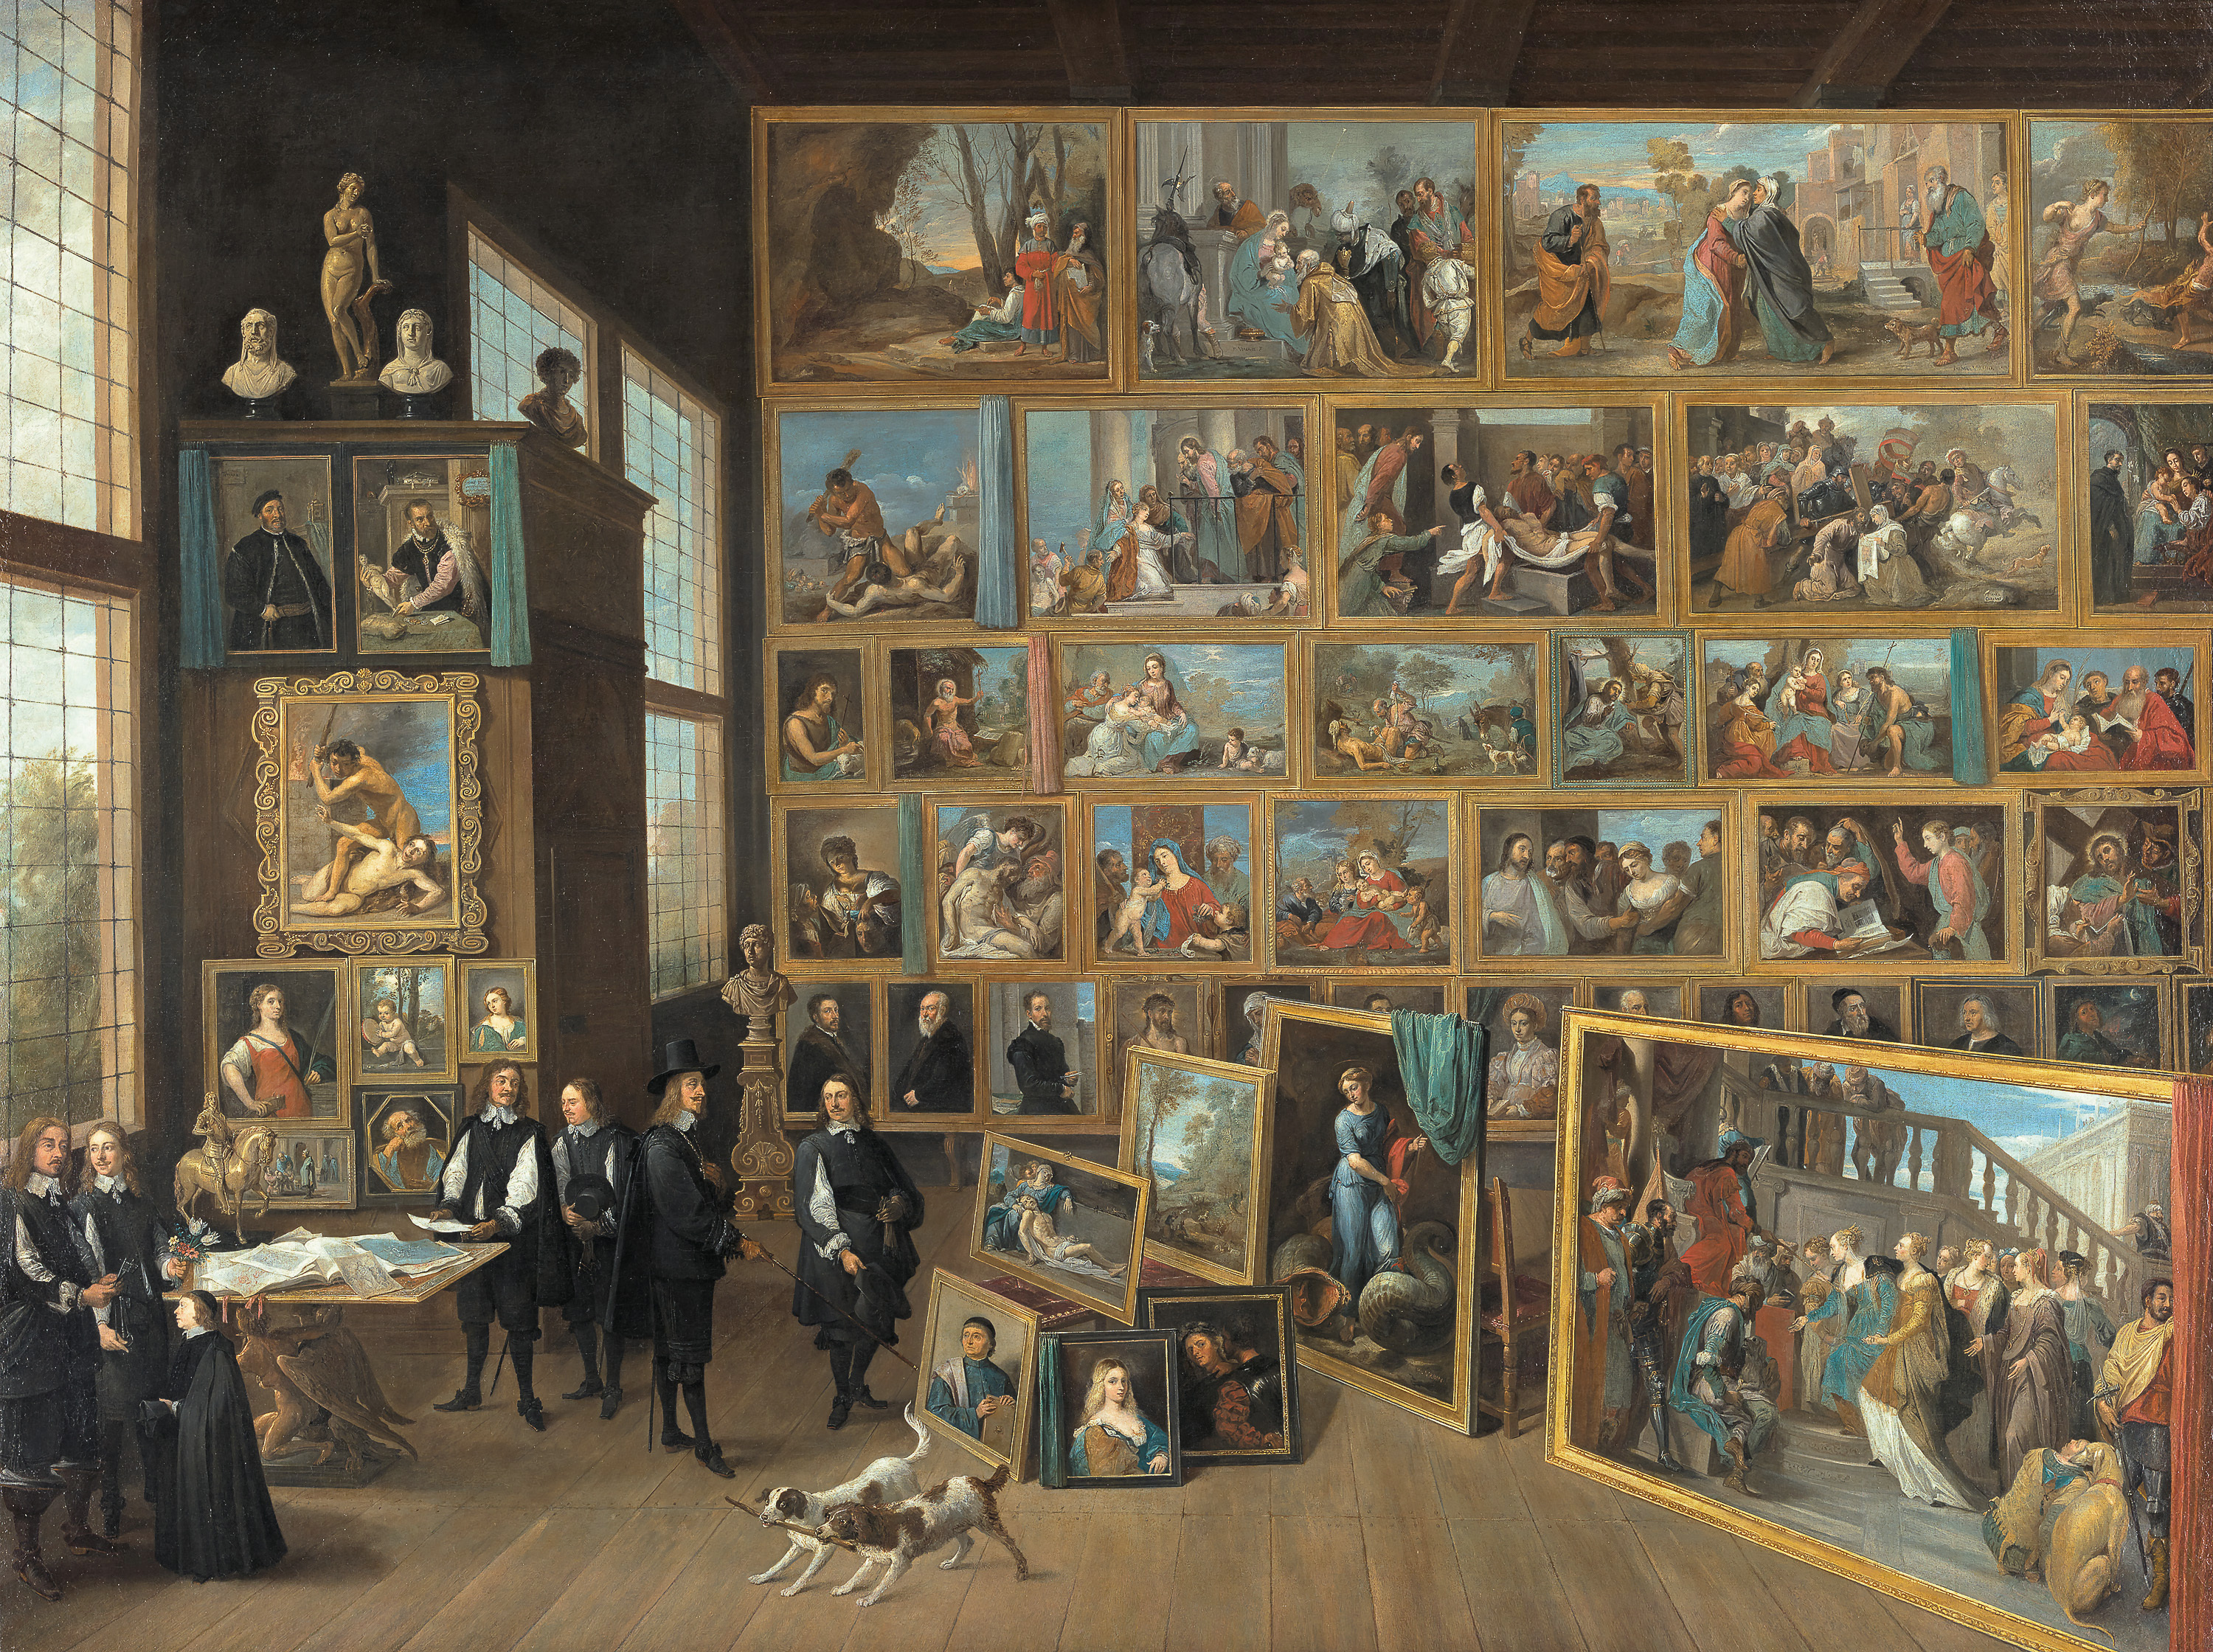 Archduke Leopold Wilhelm in His Gallery at Brussels by David Teniers - c. 1651 - 124 × 165 cm Kunsthistorisches Museum